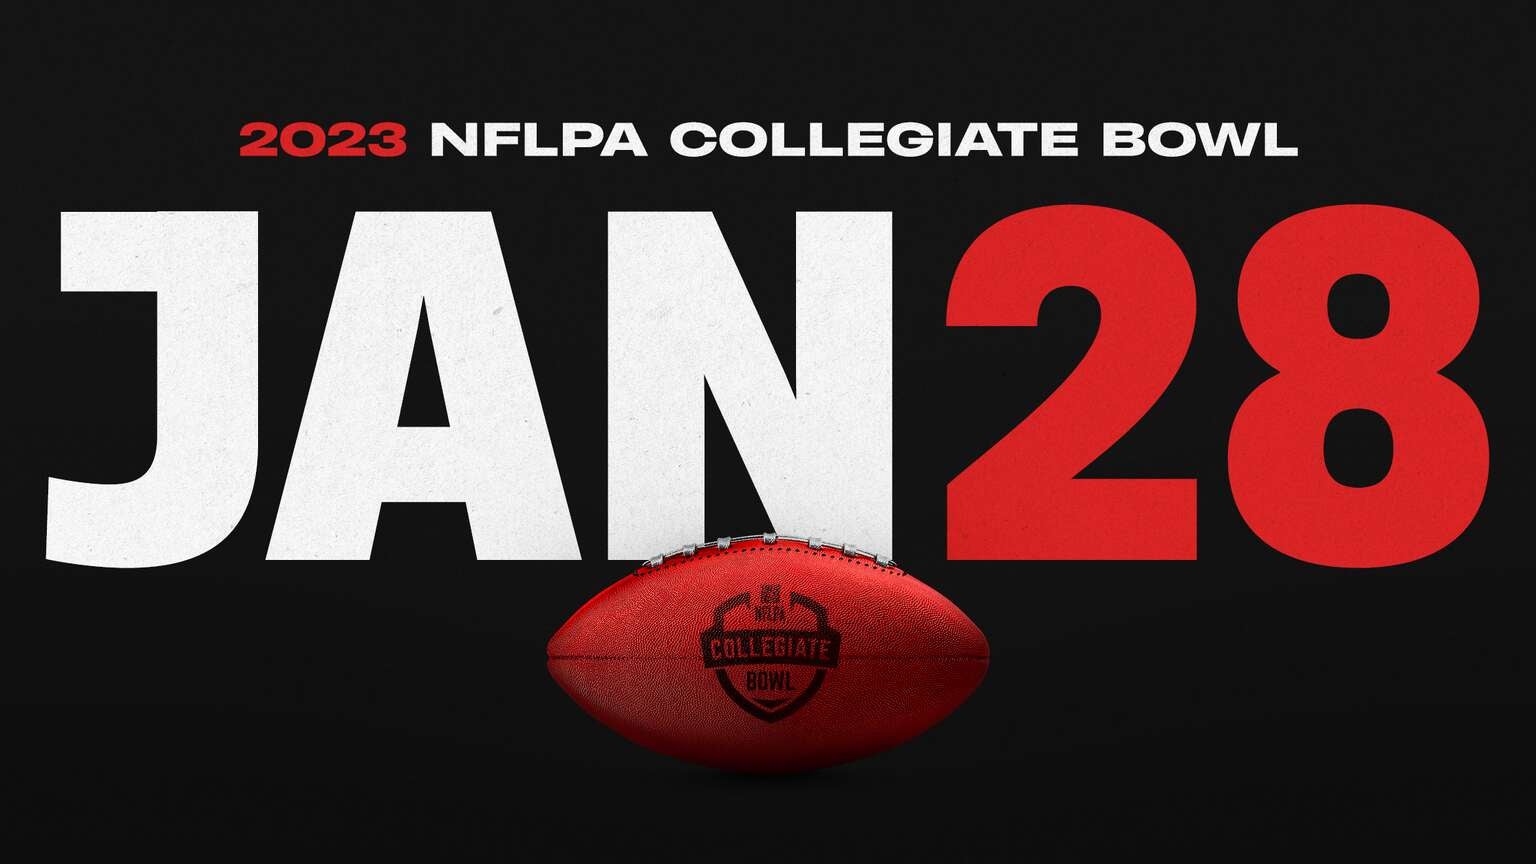 How to Watch 2023 NFLPA Collegiate Bowl Live Online Without Cable The